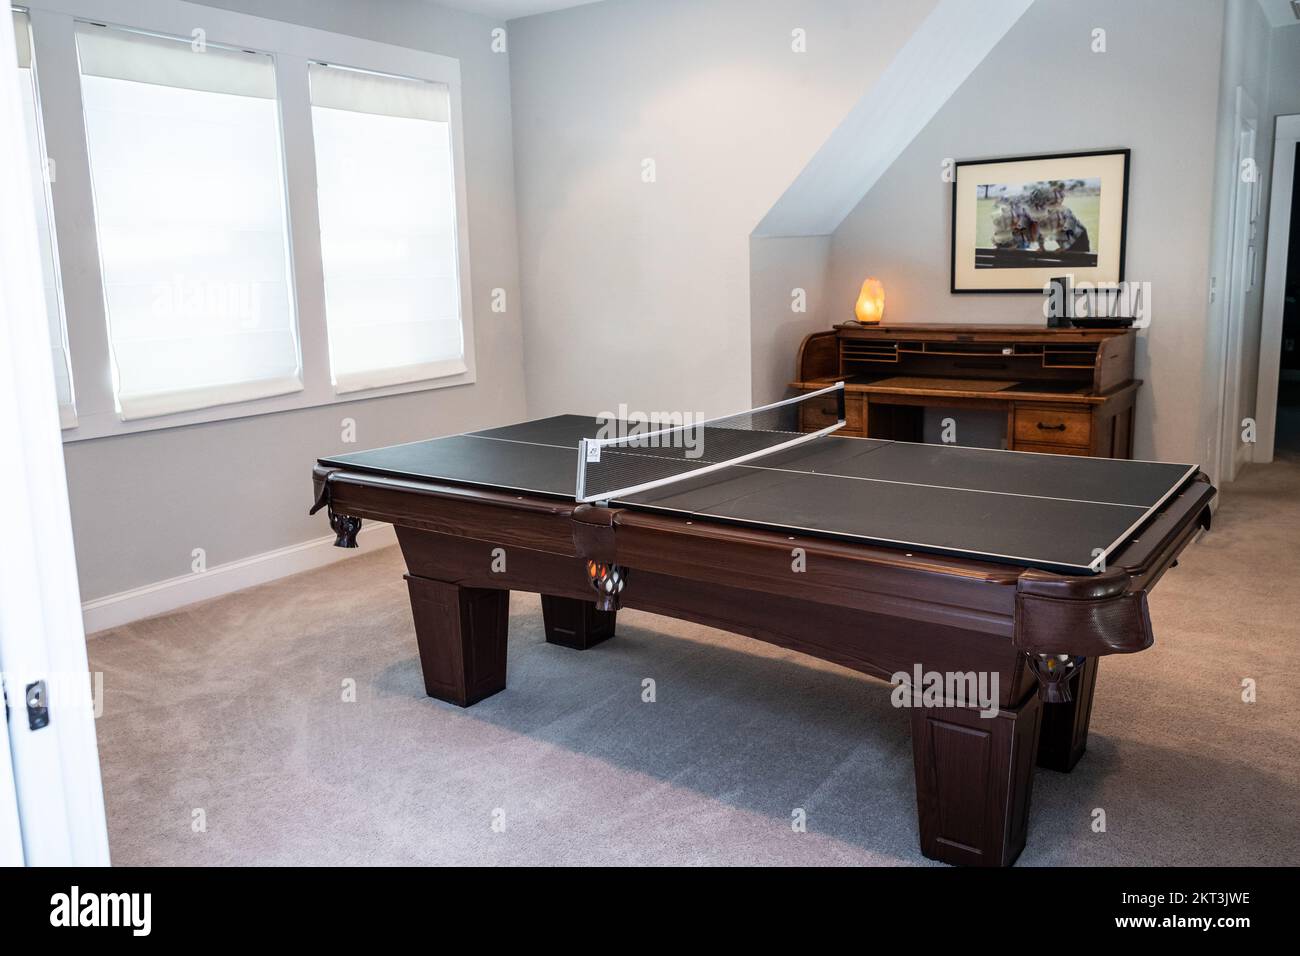 A game room or bonus upstairs room with a pool table converted to a table tennis game Stock Photo